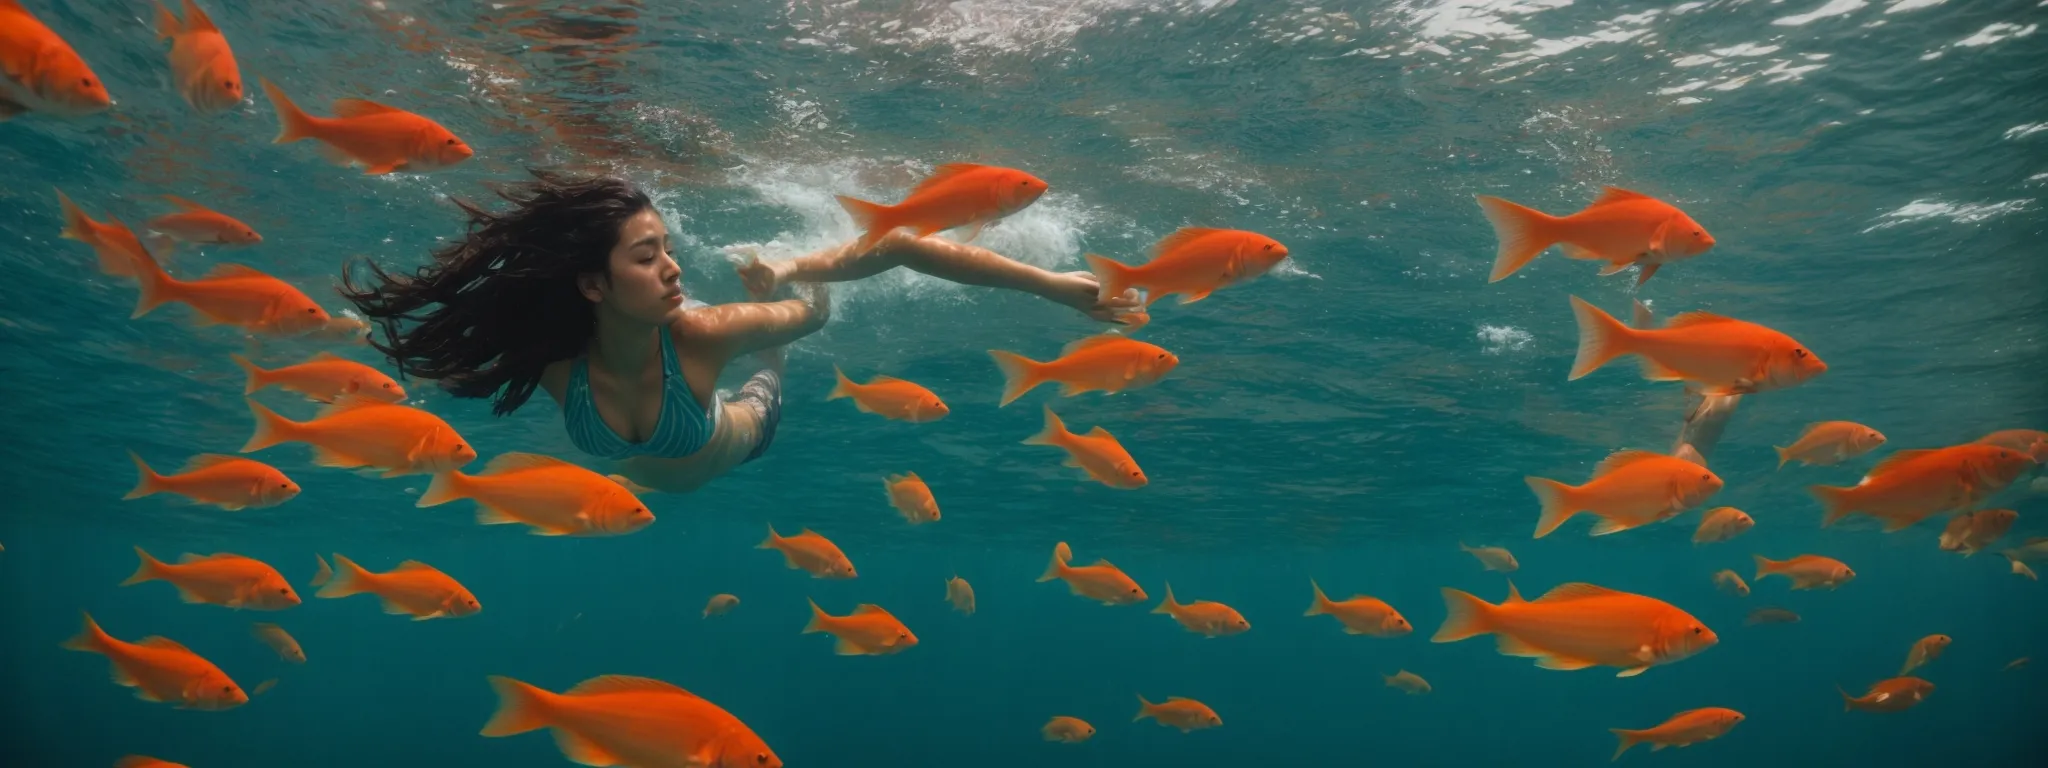 a person submerged in ocean waters, swimming near bright coral and tropical fish.